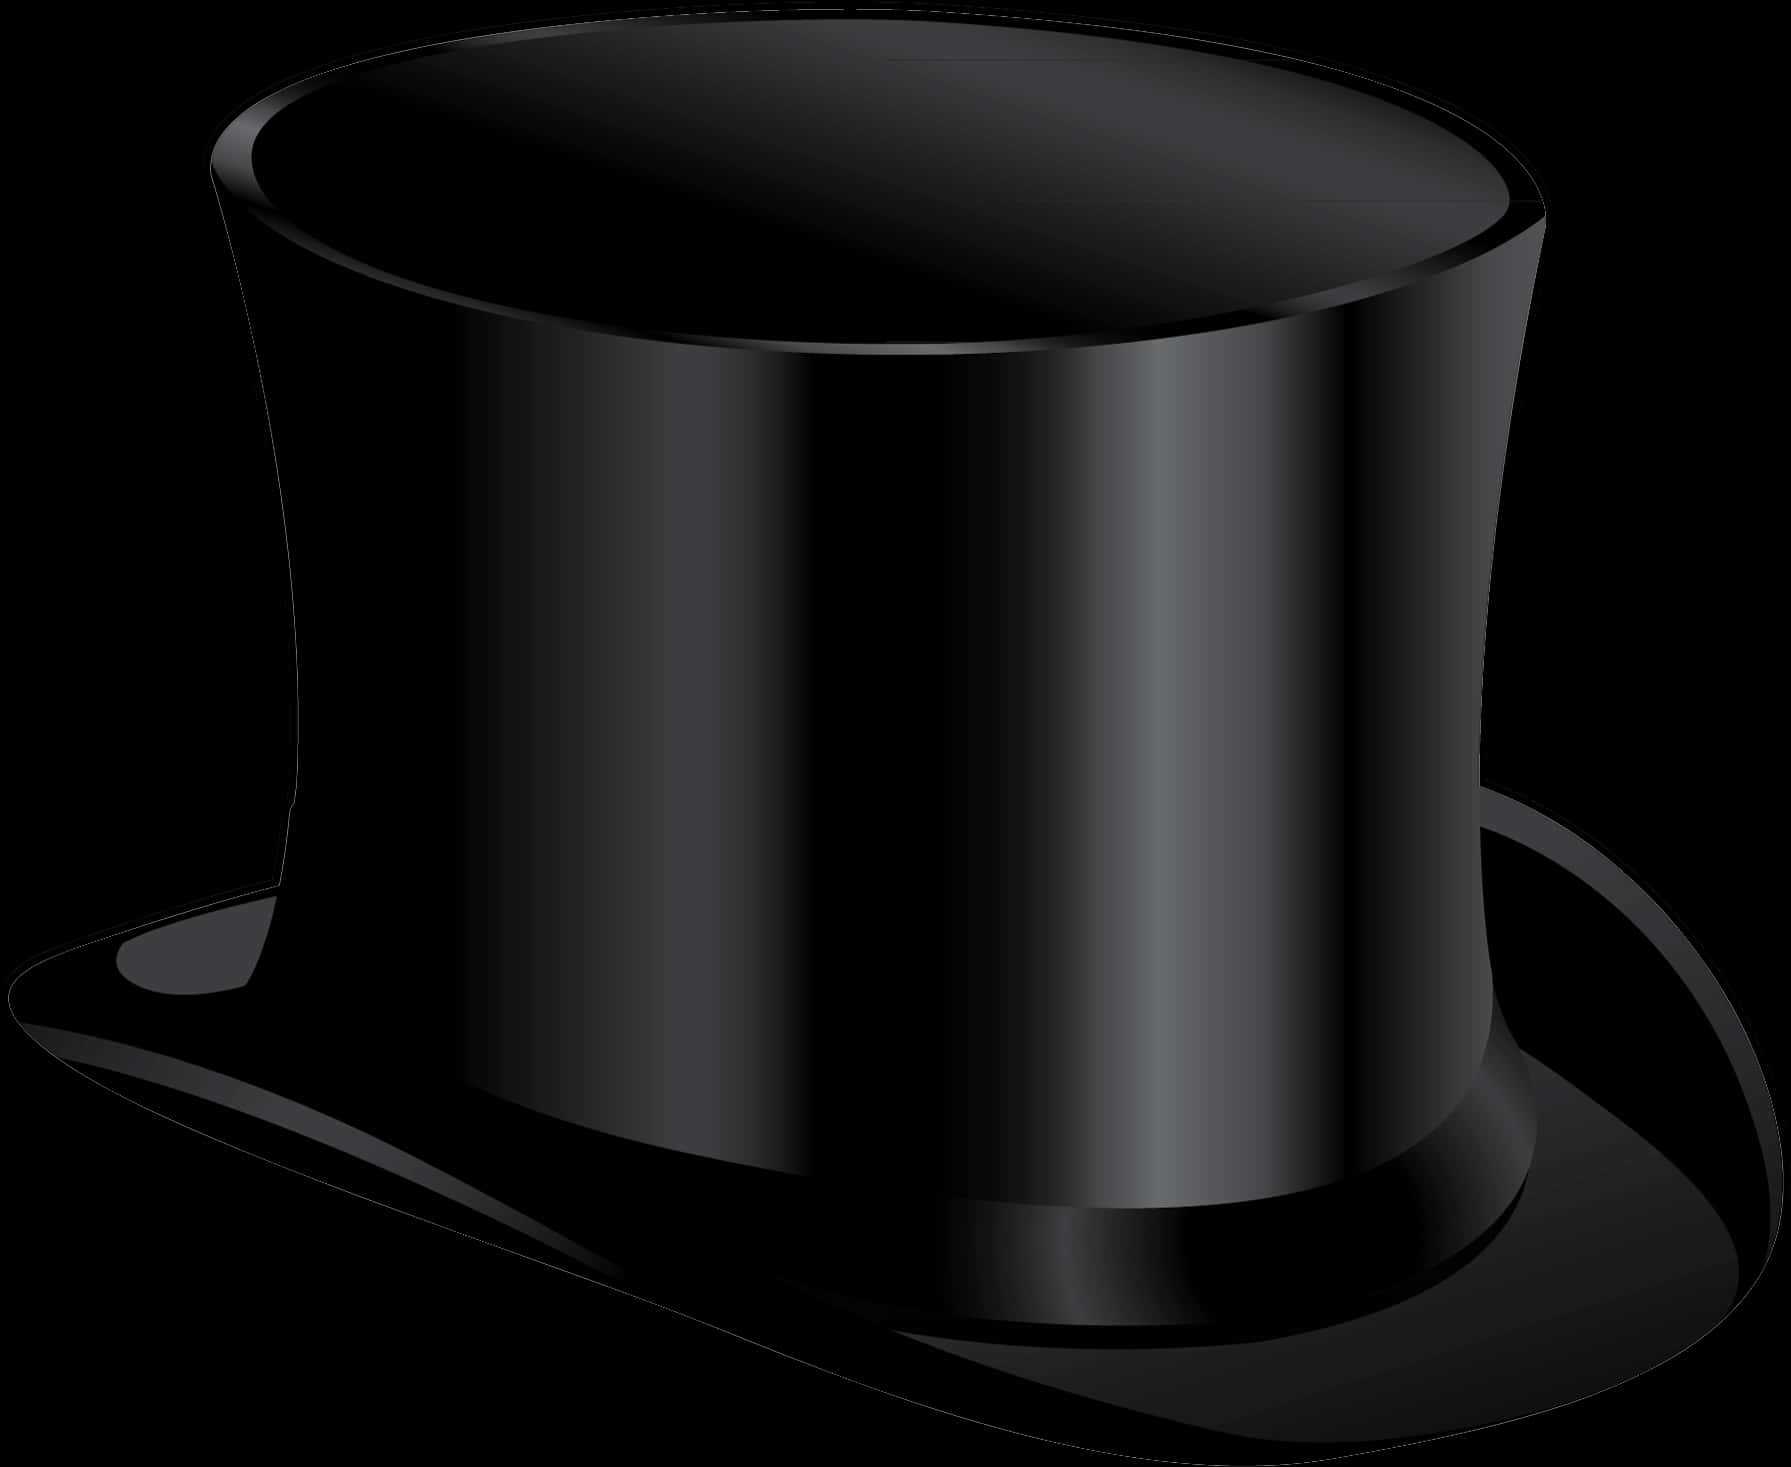 A Black Top Hat On A Black Background